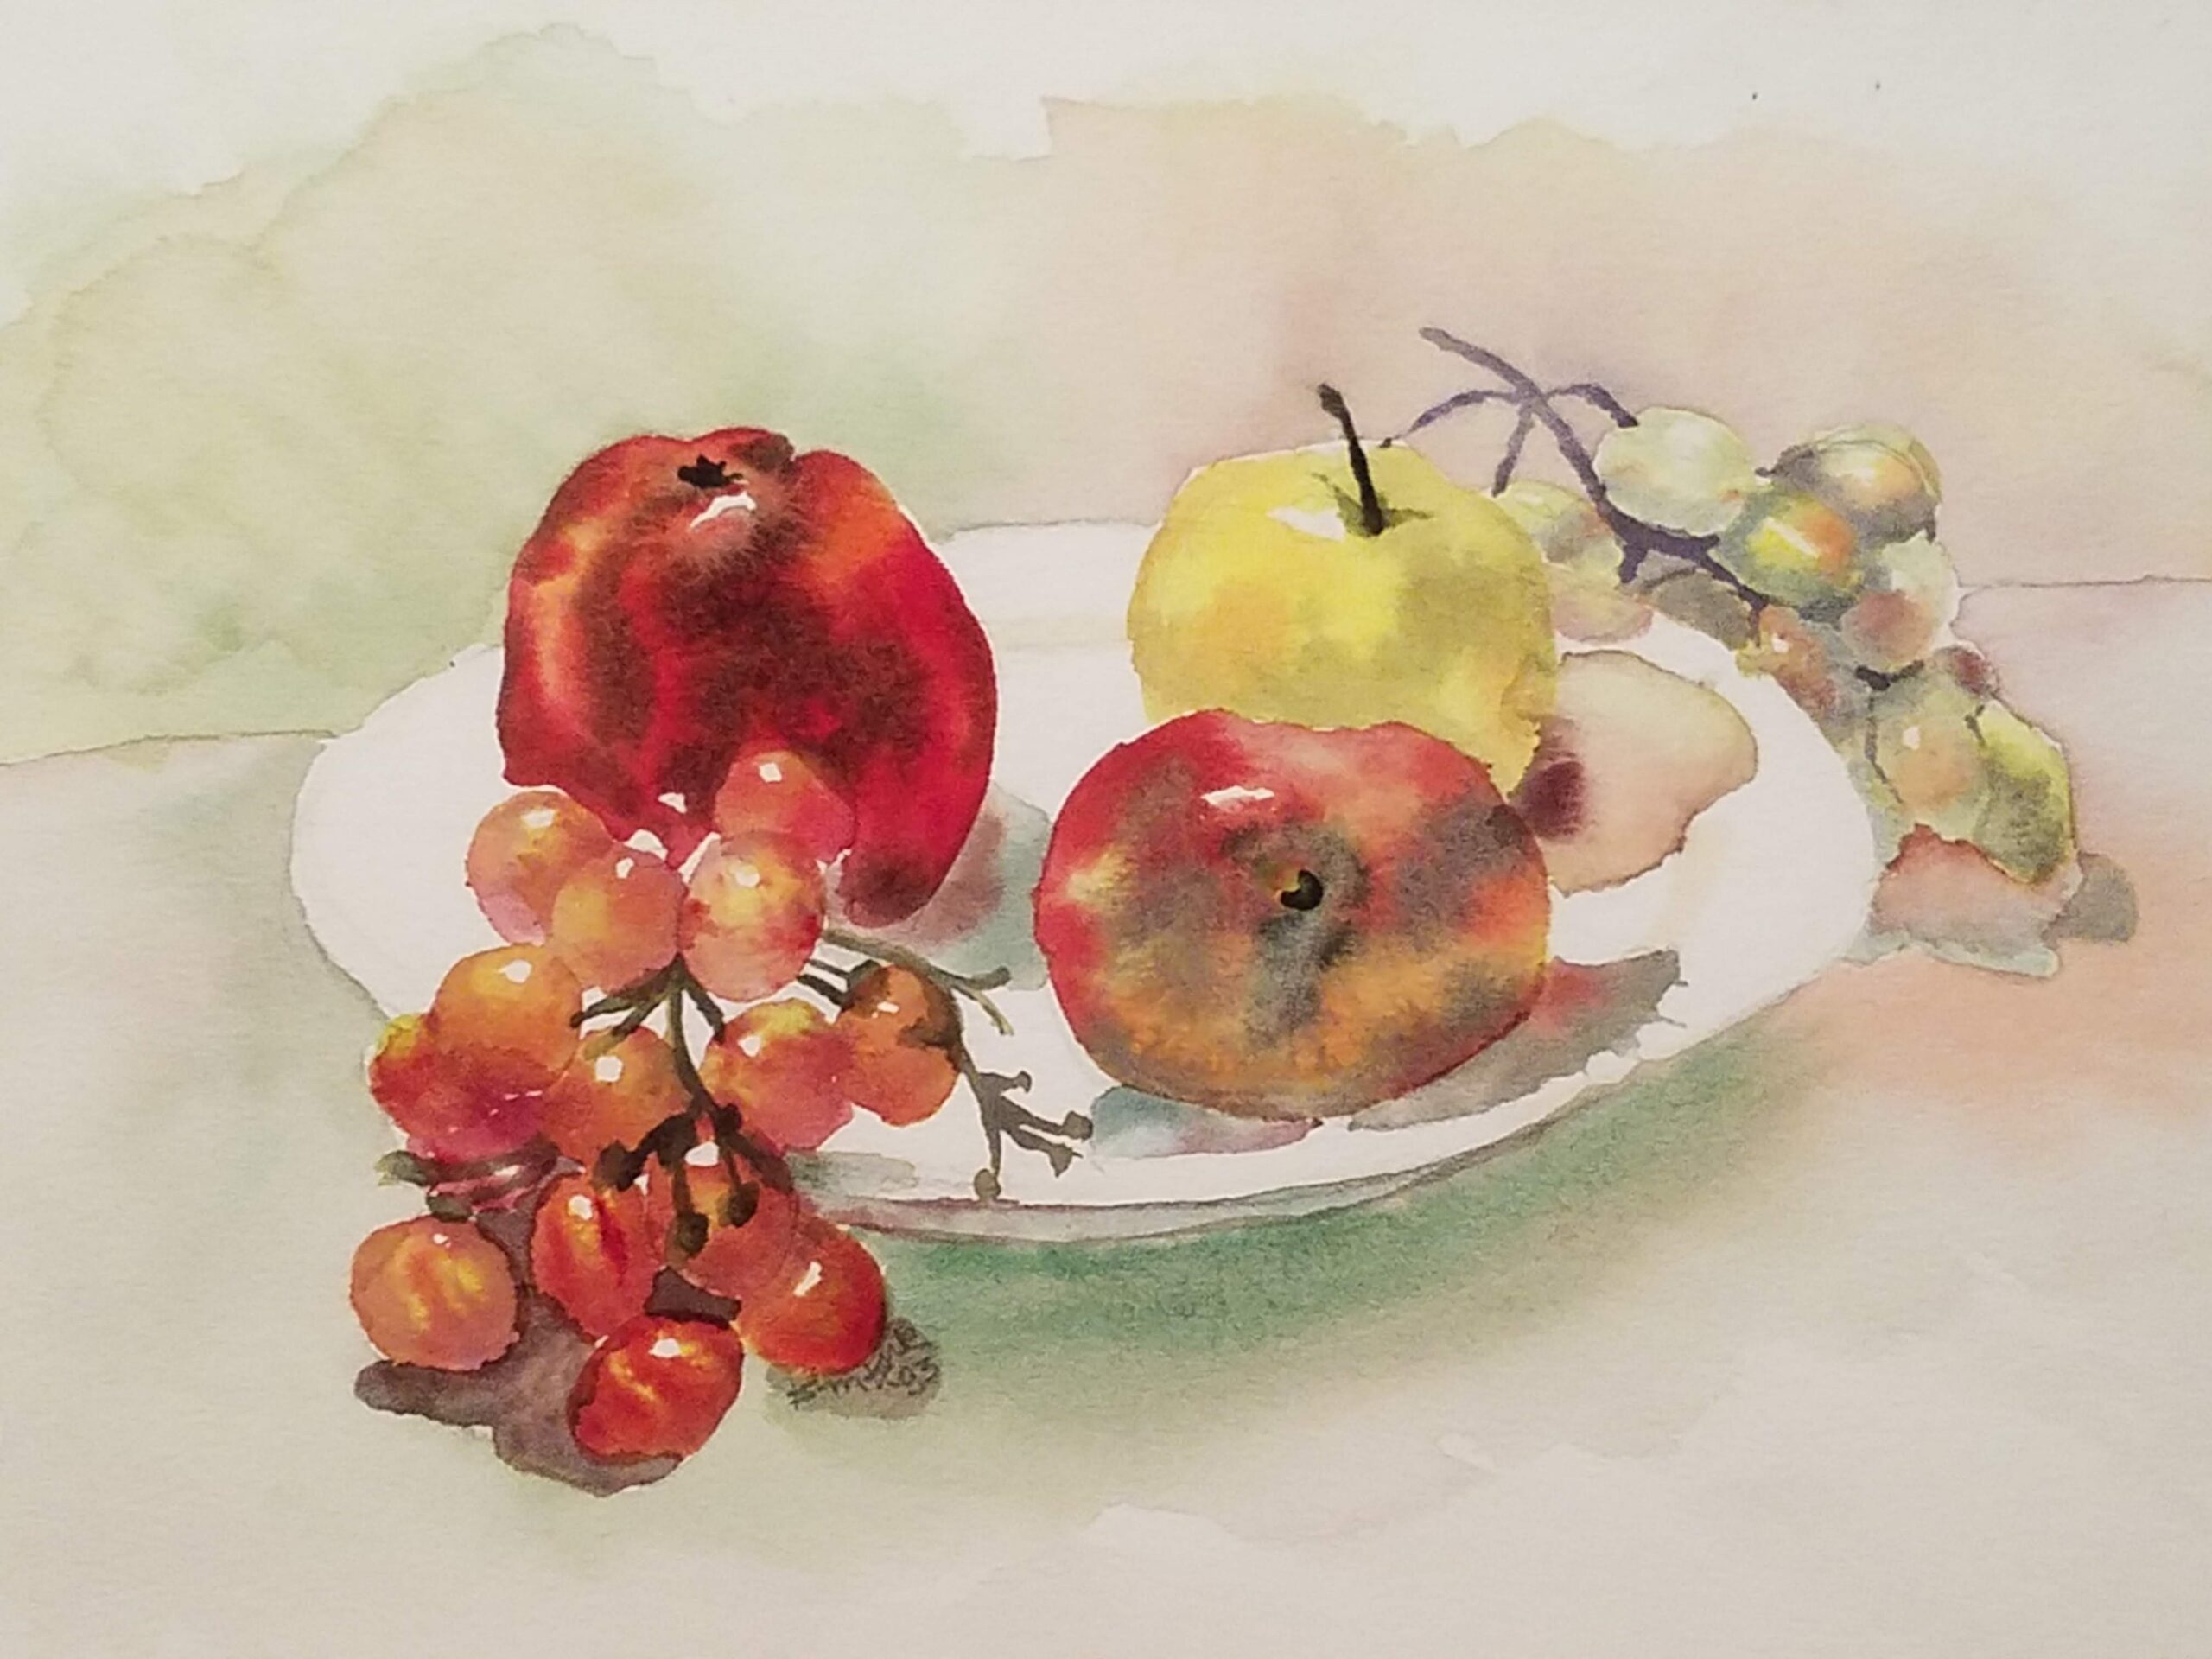 plate with grapes, apples, tomato